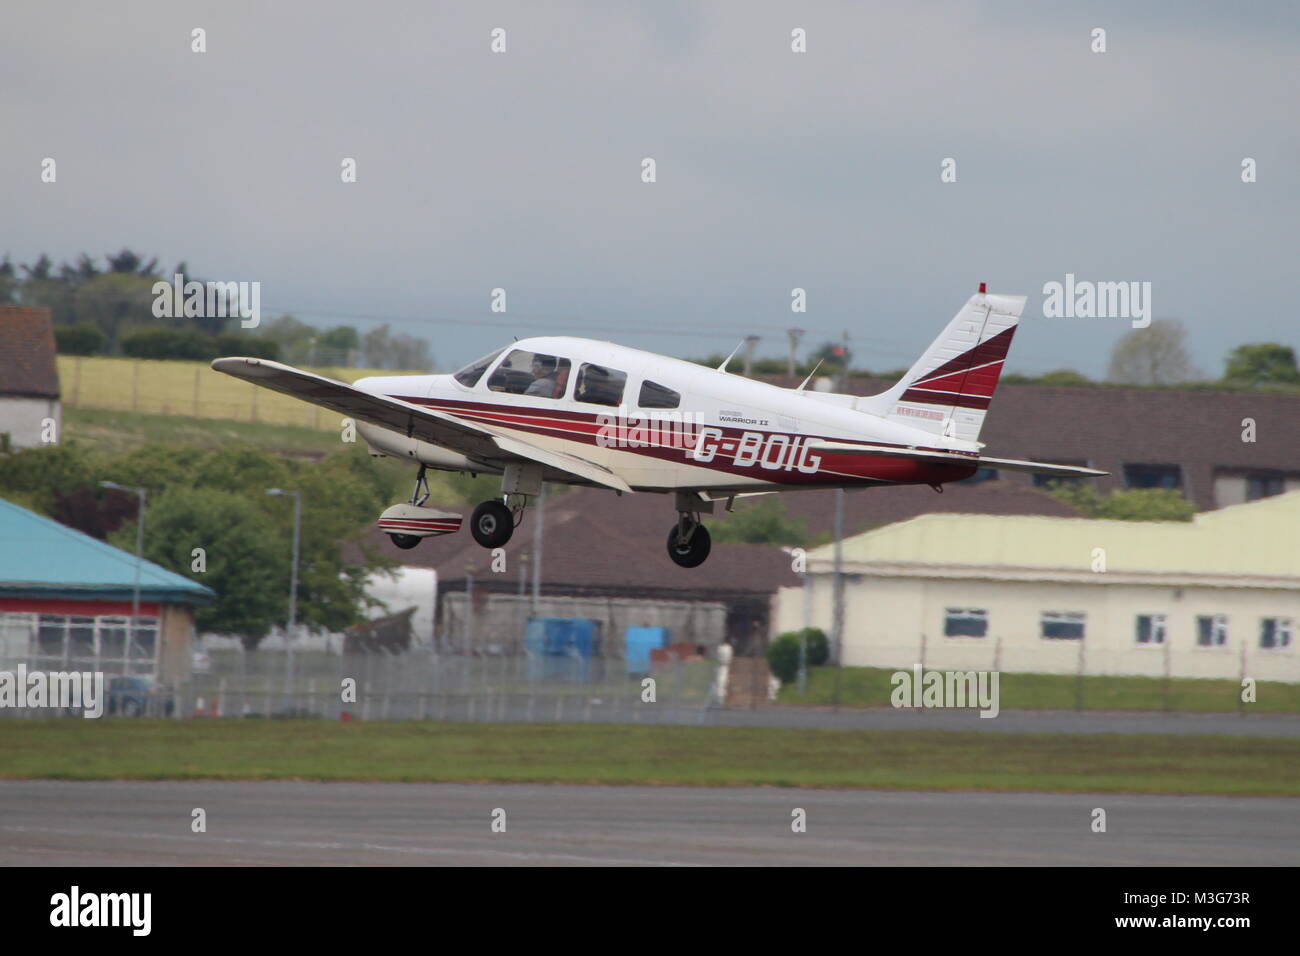 G-BOIG, a privately-owned Piper PA-28-161 Warrior II, departing Prestwick Airport in Ayrshire. Stock Photo